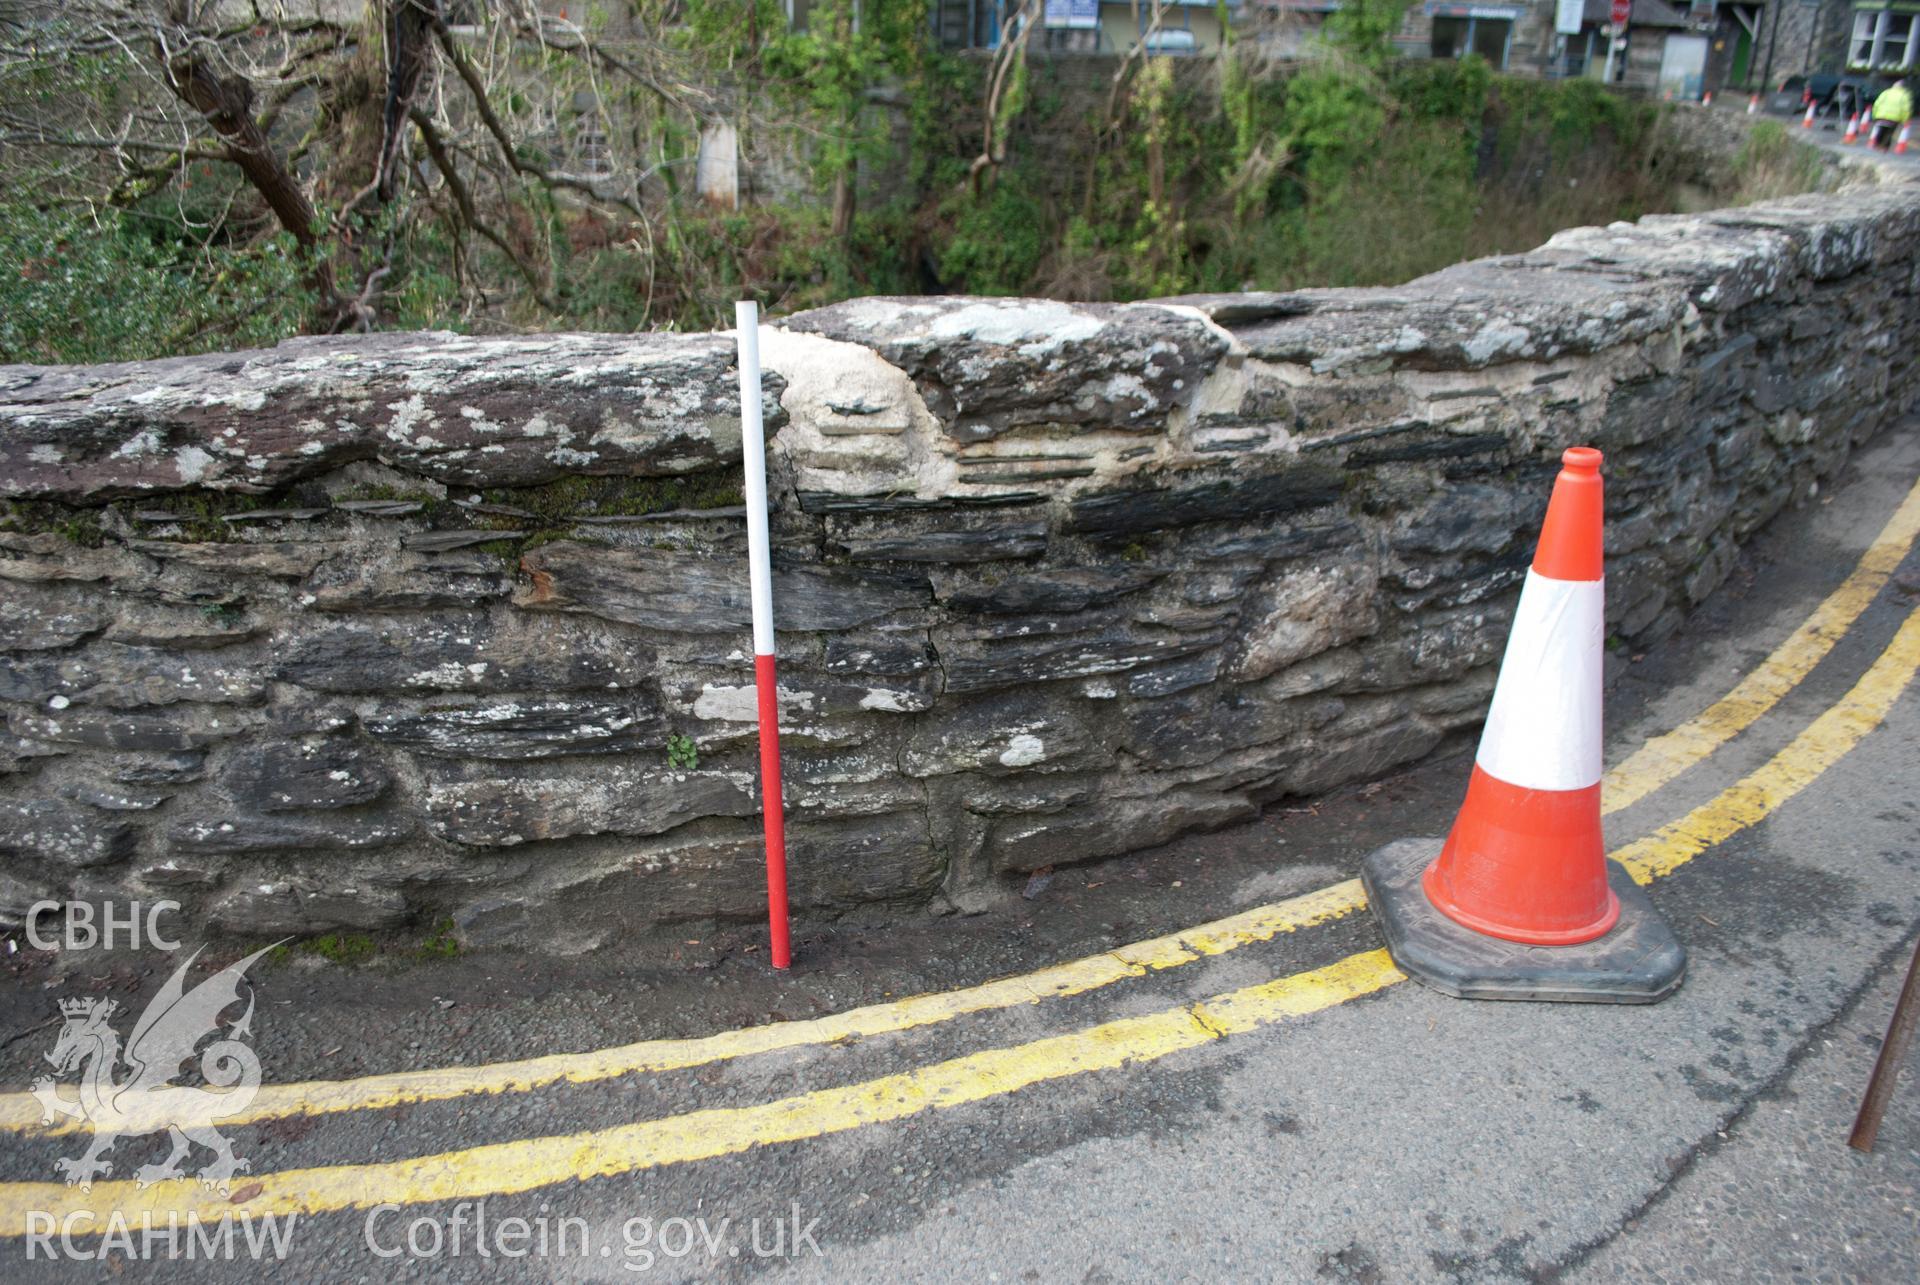 View from east south east of bridge repairs on northeast corner of the parapet, showing damage had been extensive. Digital photograph taken for Archaeological Watching Brief at Pont y Pair, Betws y Coed, 2019. Gwynedd Archaeological Trust Project G2587.